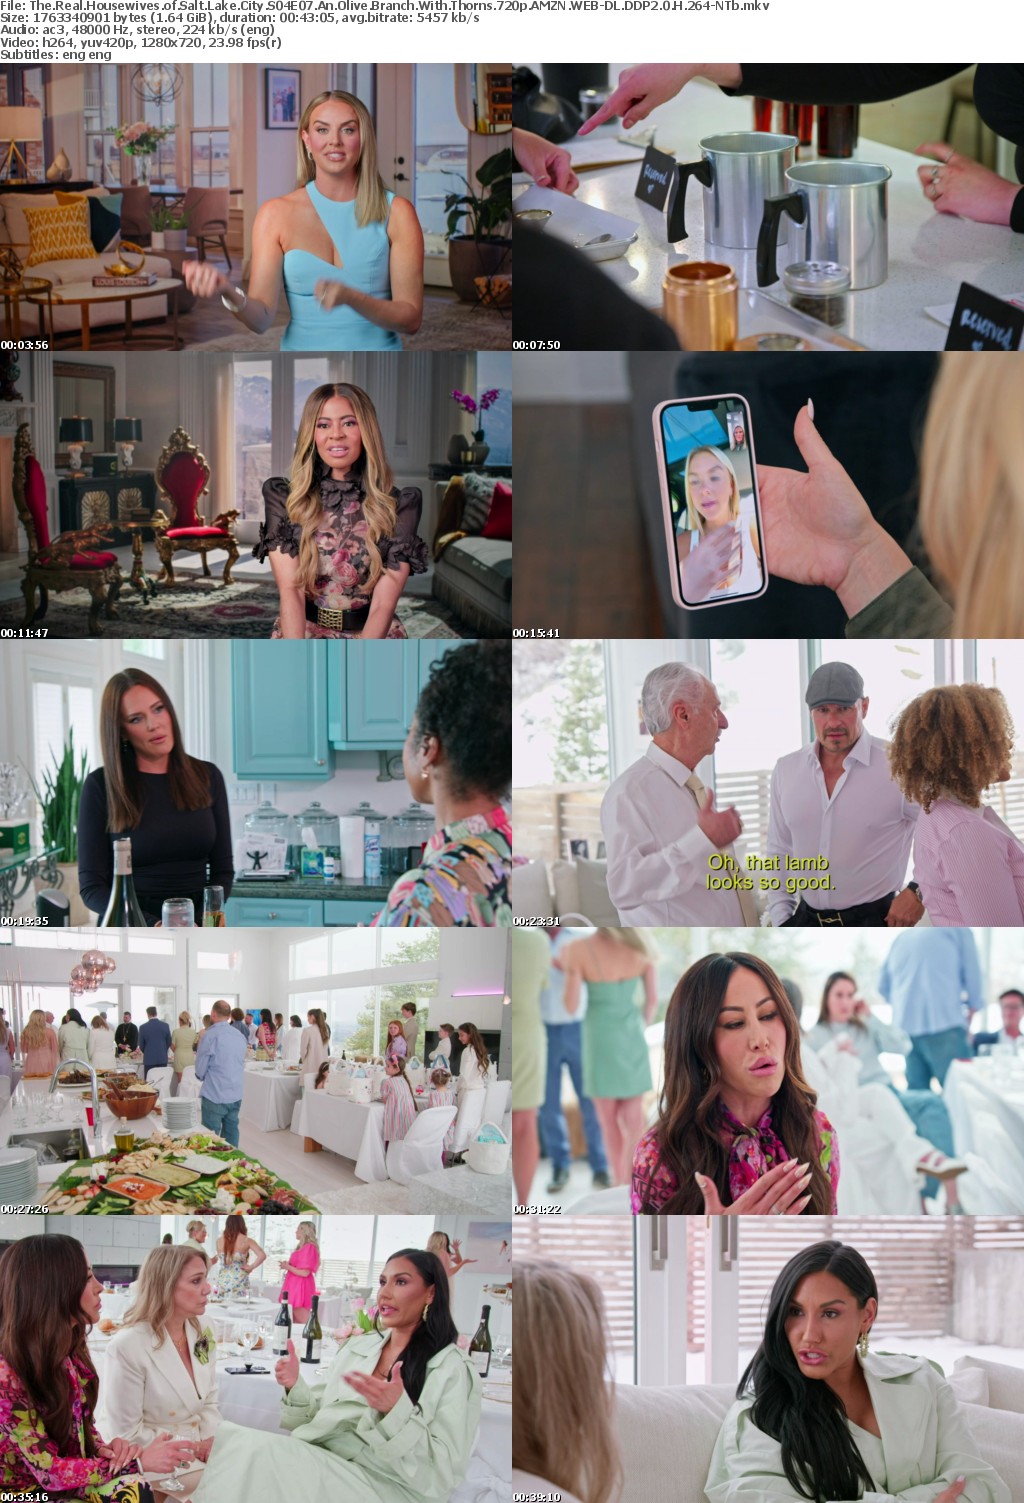 The Real Housewives of Salt Lake City S04E07 An Olive Branch With Thorns 720p AMZN WEB-DL DDP2 0 H 264-NTb